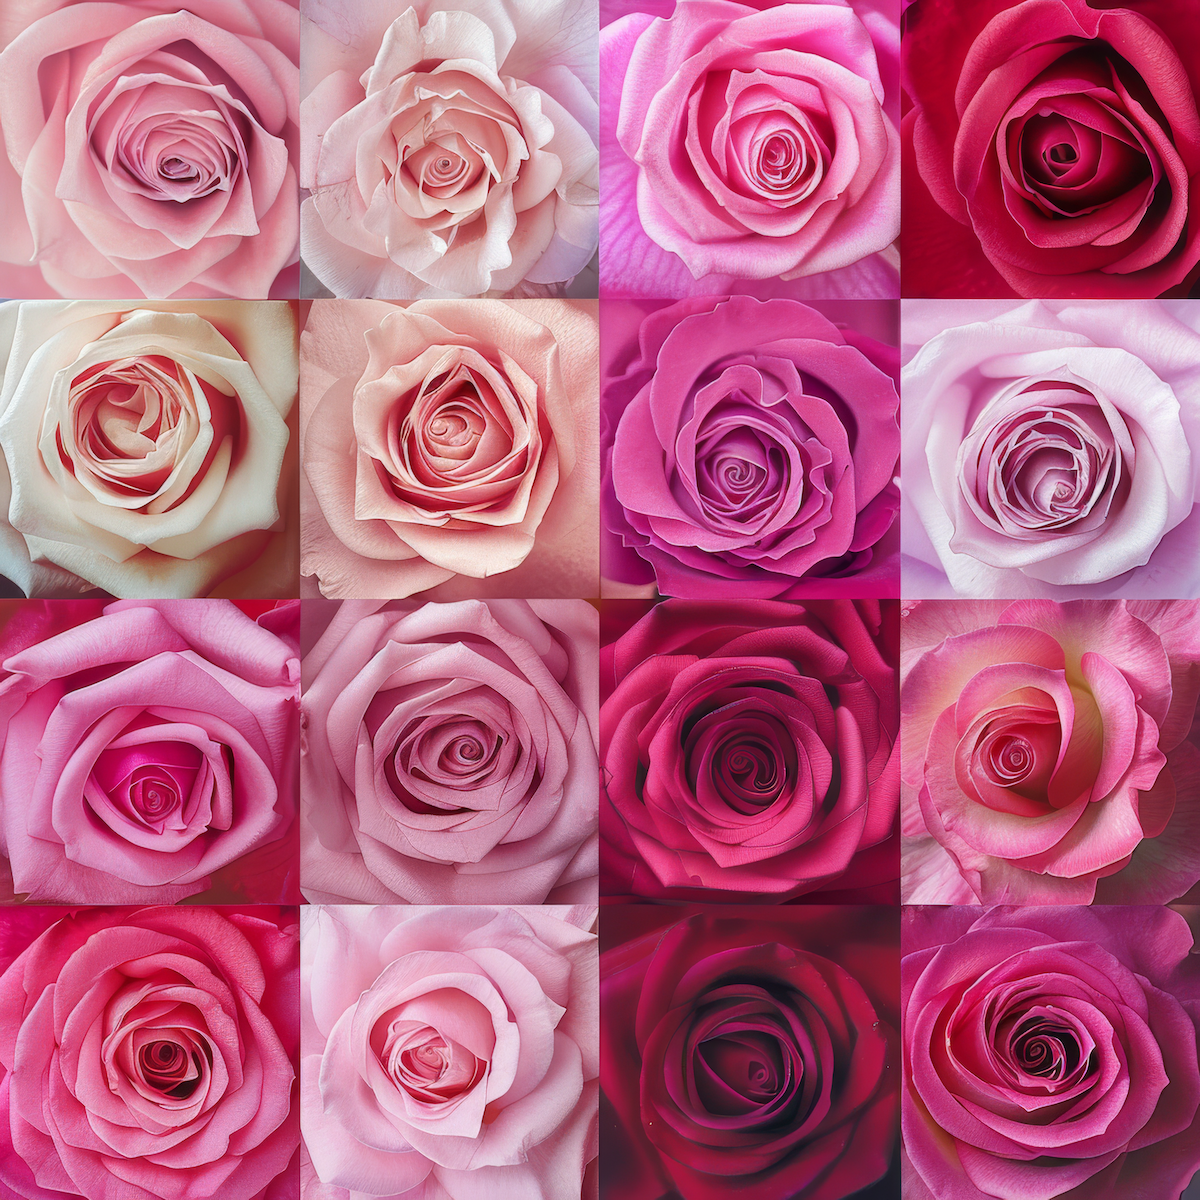 collage of 16 different shades of pink roses perfect for a rose garden